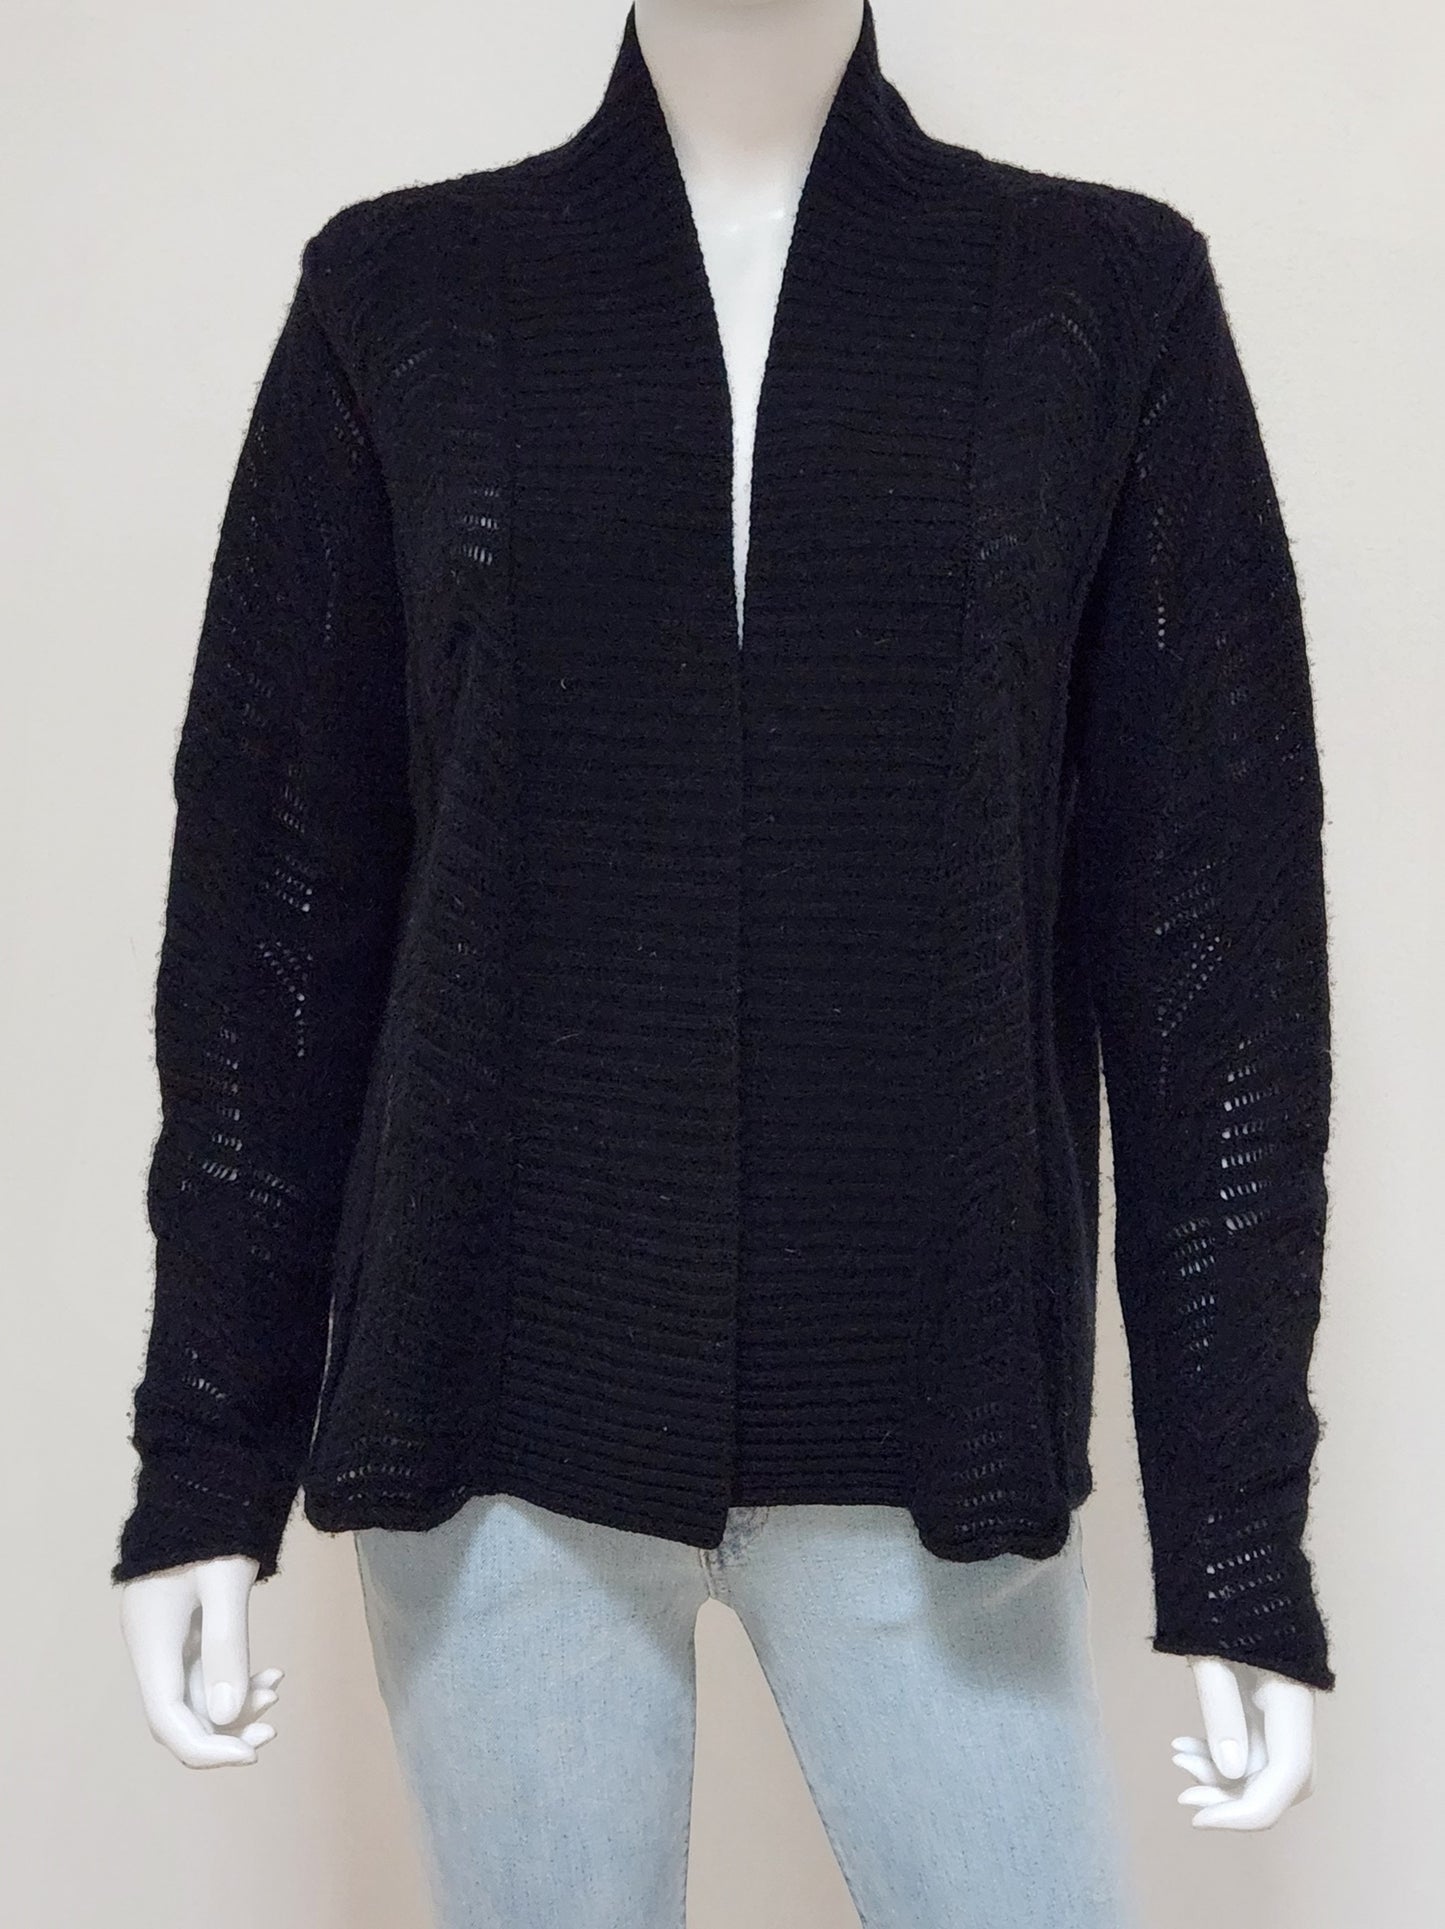 Open Knit Cashmere Cardigan Size Small